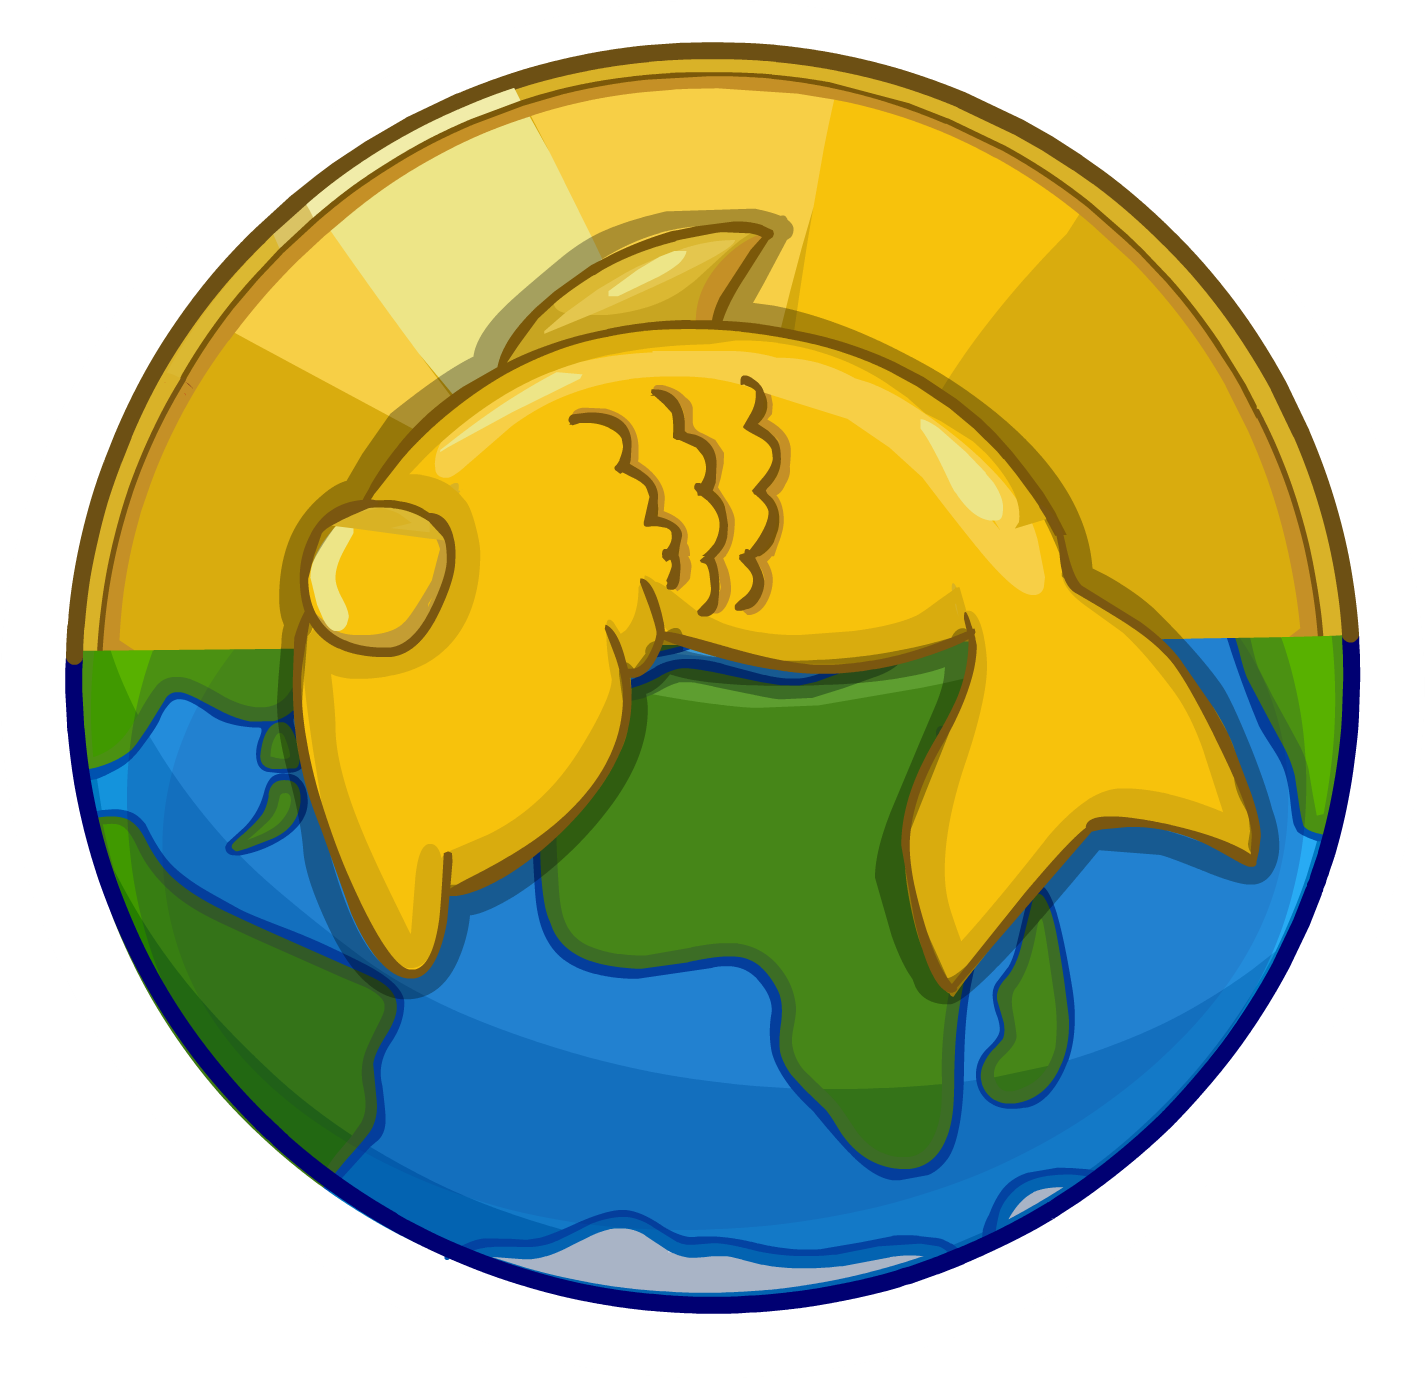 donation clipart gold coin donation